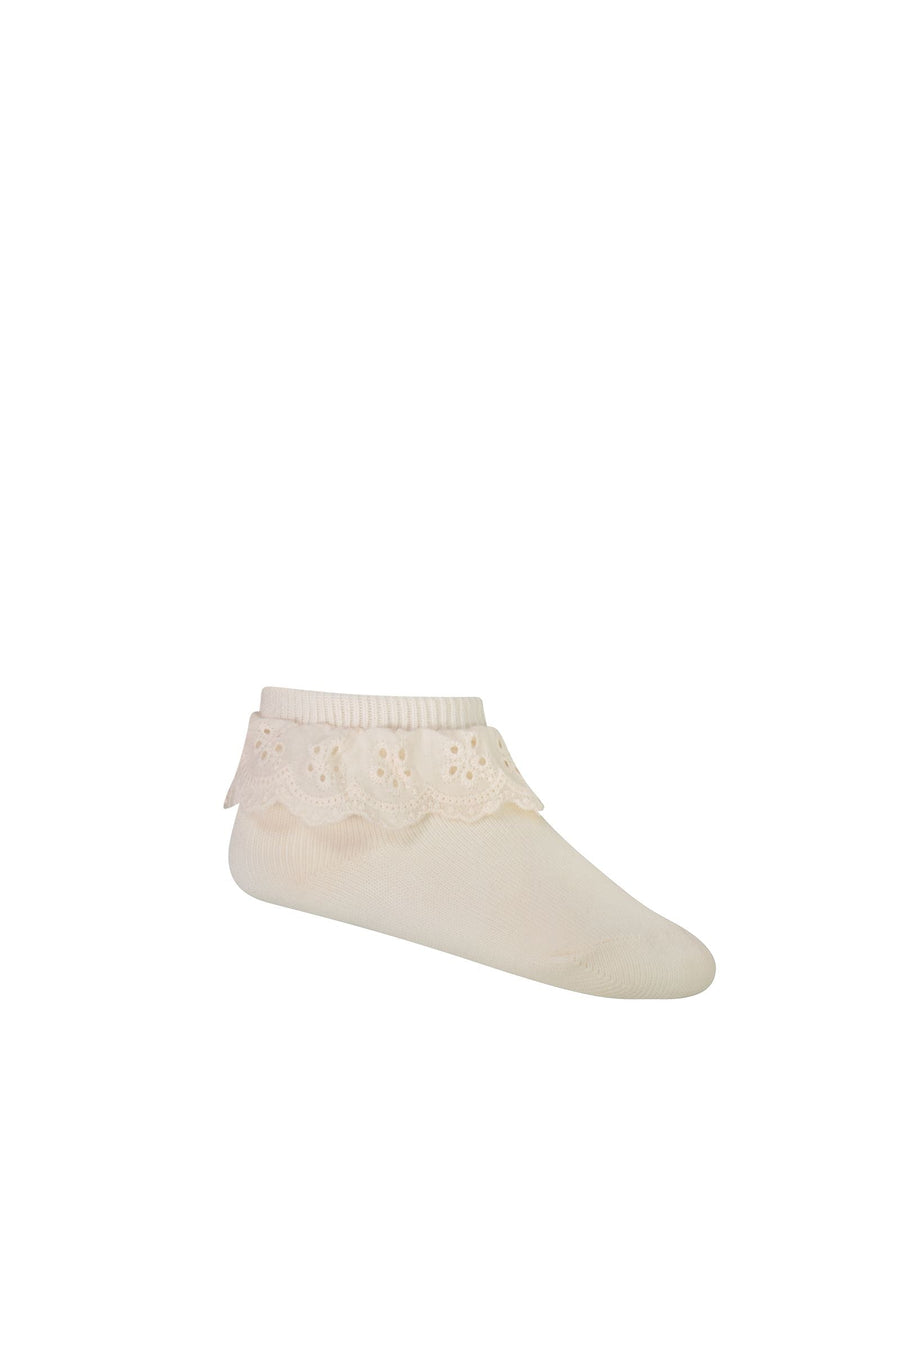 Frill Ankle Sock - Shell Pink